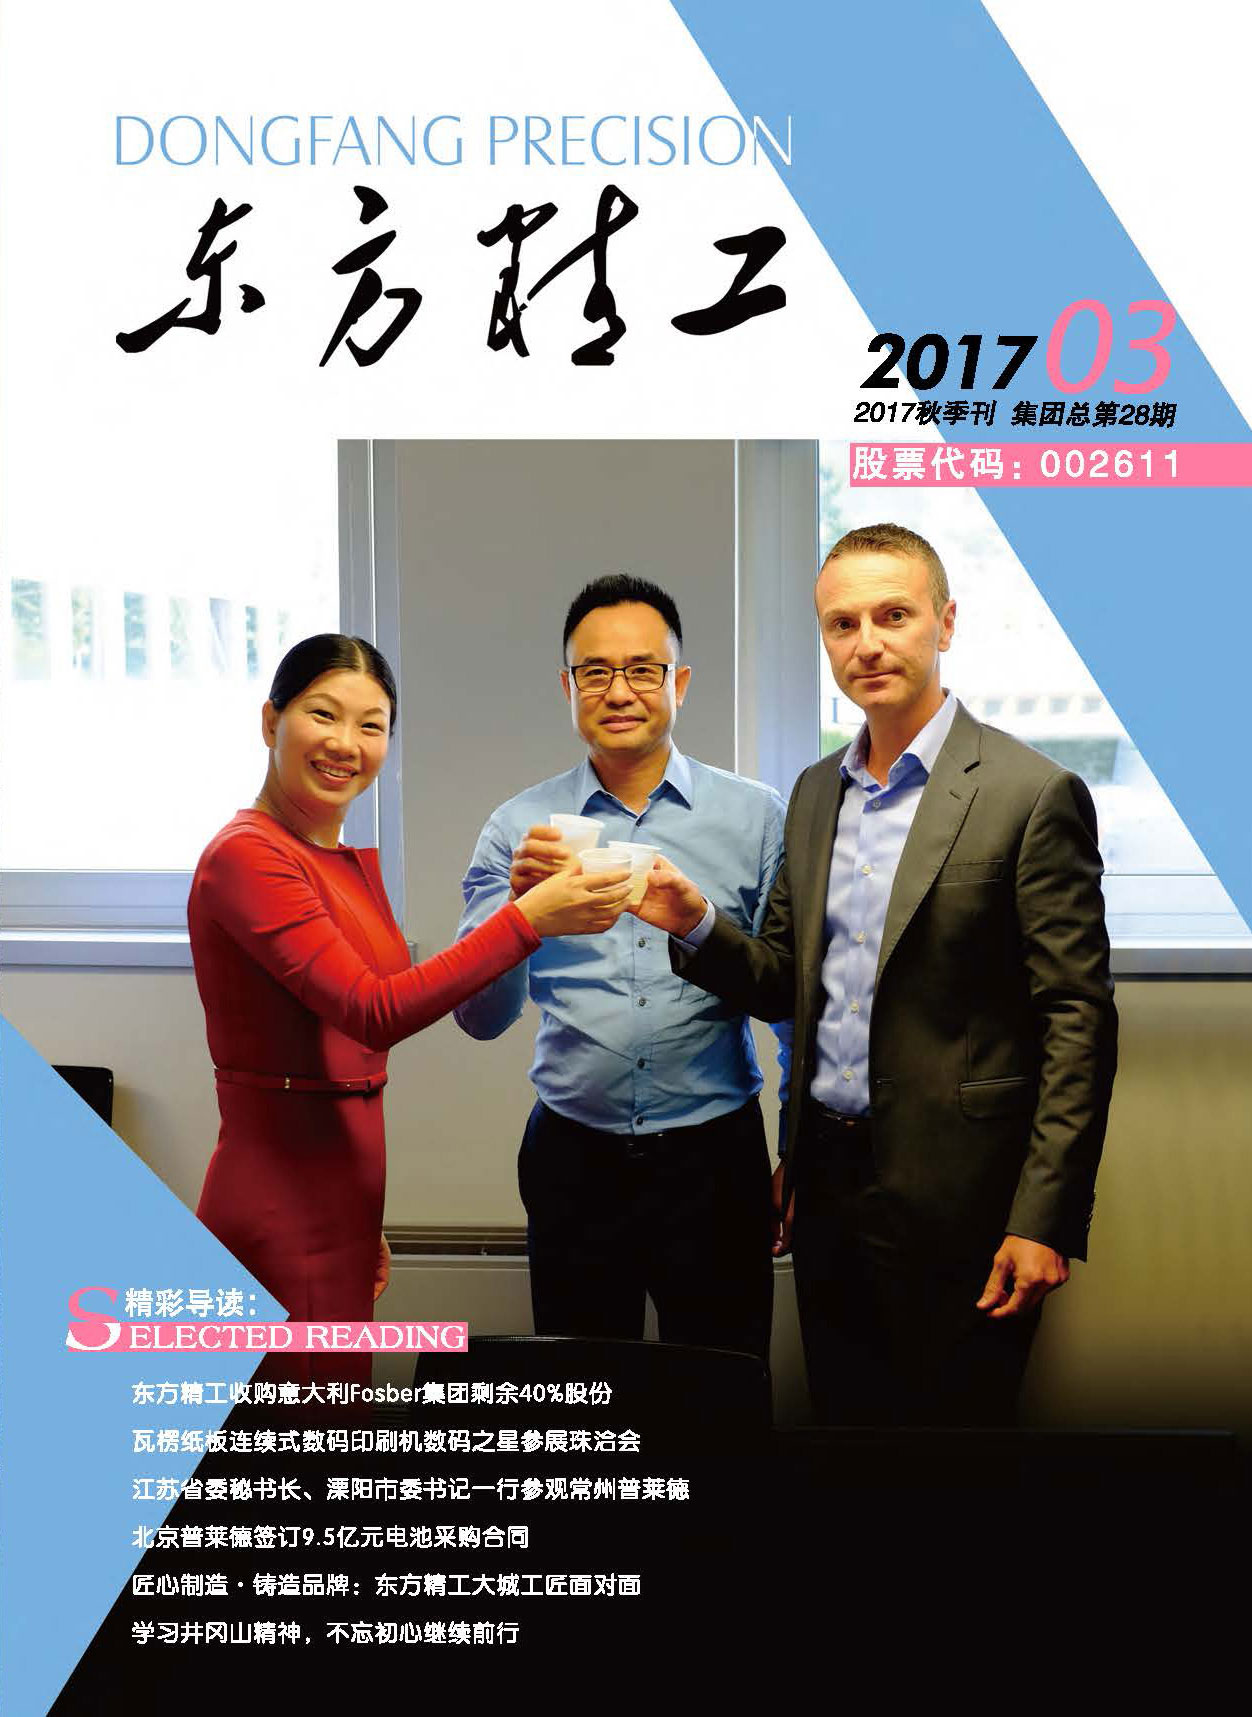 Dongfang Precision, Issue 28